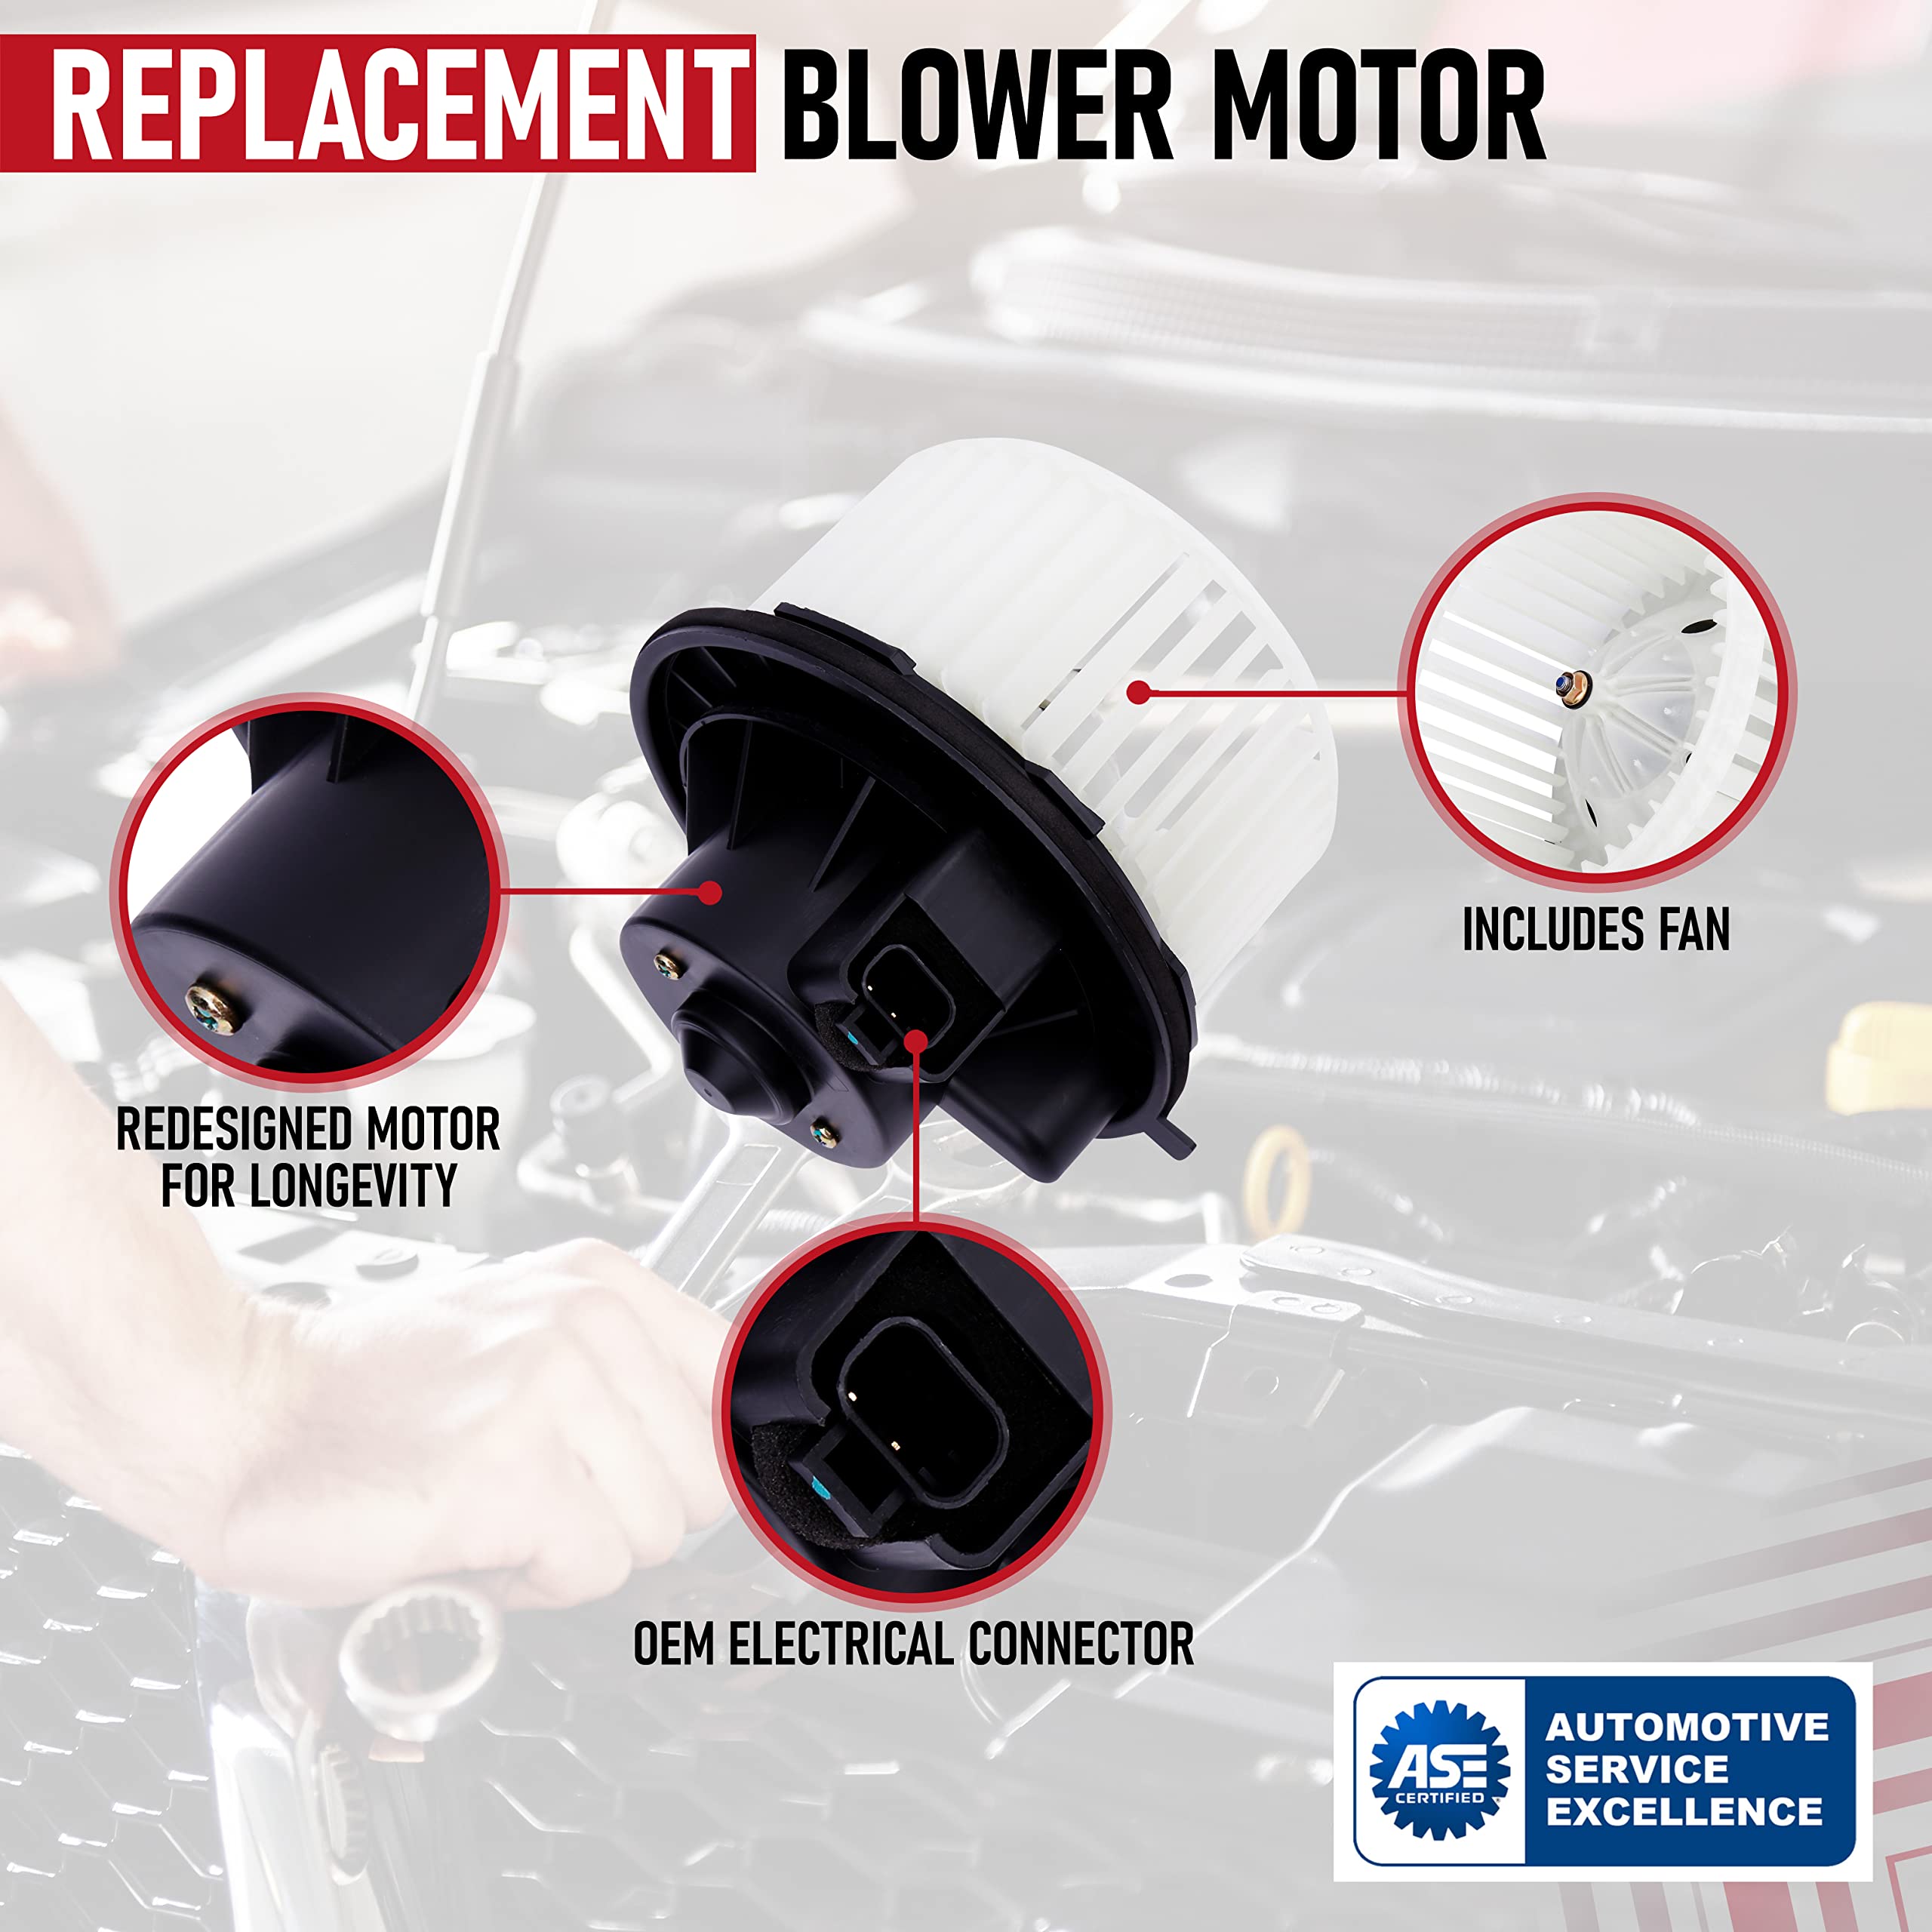 AA Ignition AC Blower Motor with Fan - Replaces 700191, 75748, 89019320, 89019301 - Compatible with Chevy, GMC & Cadilalc Vehicles - Silverado, Suburban, Avalanche, Sierra, Yukon, Yukon XL 1500, 2500  - Very Good